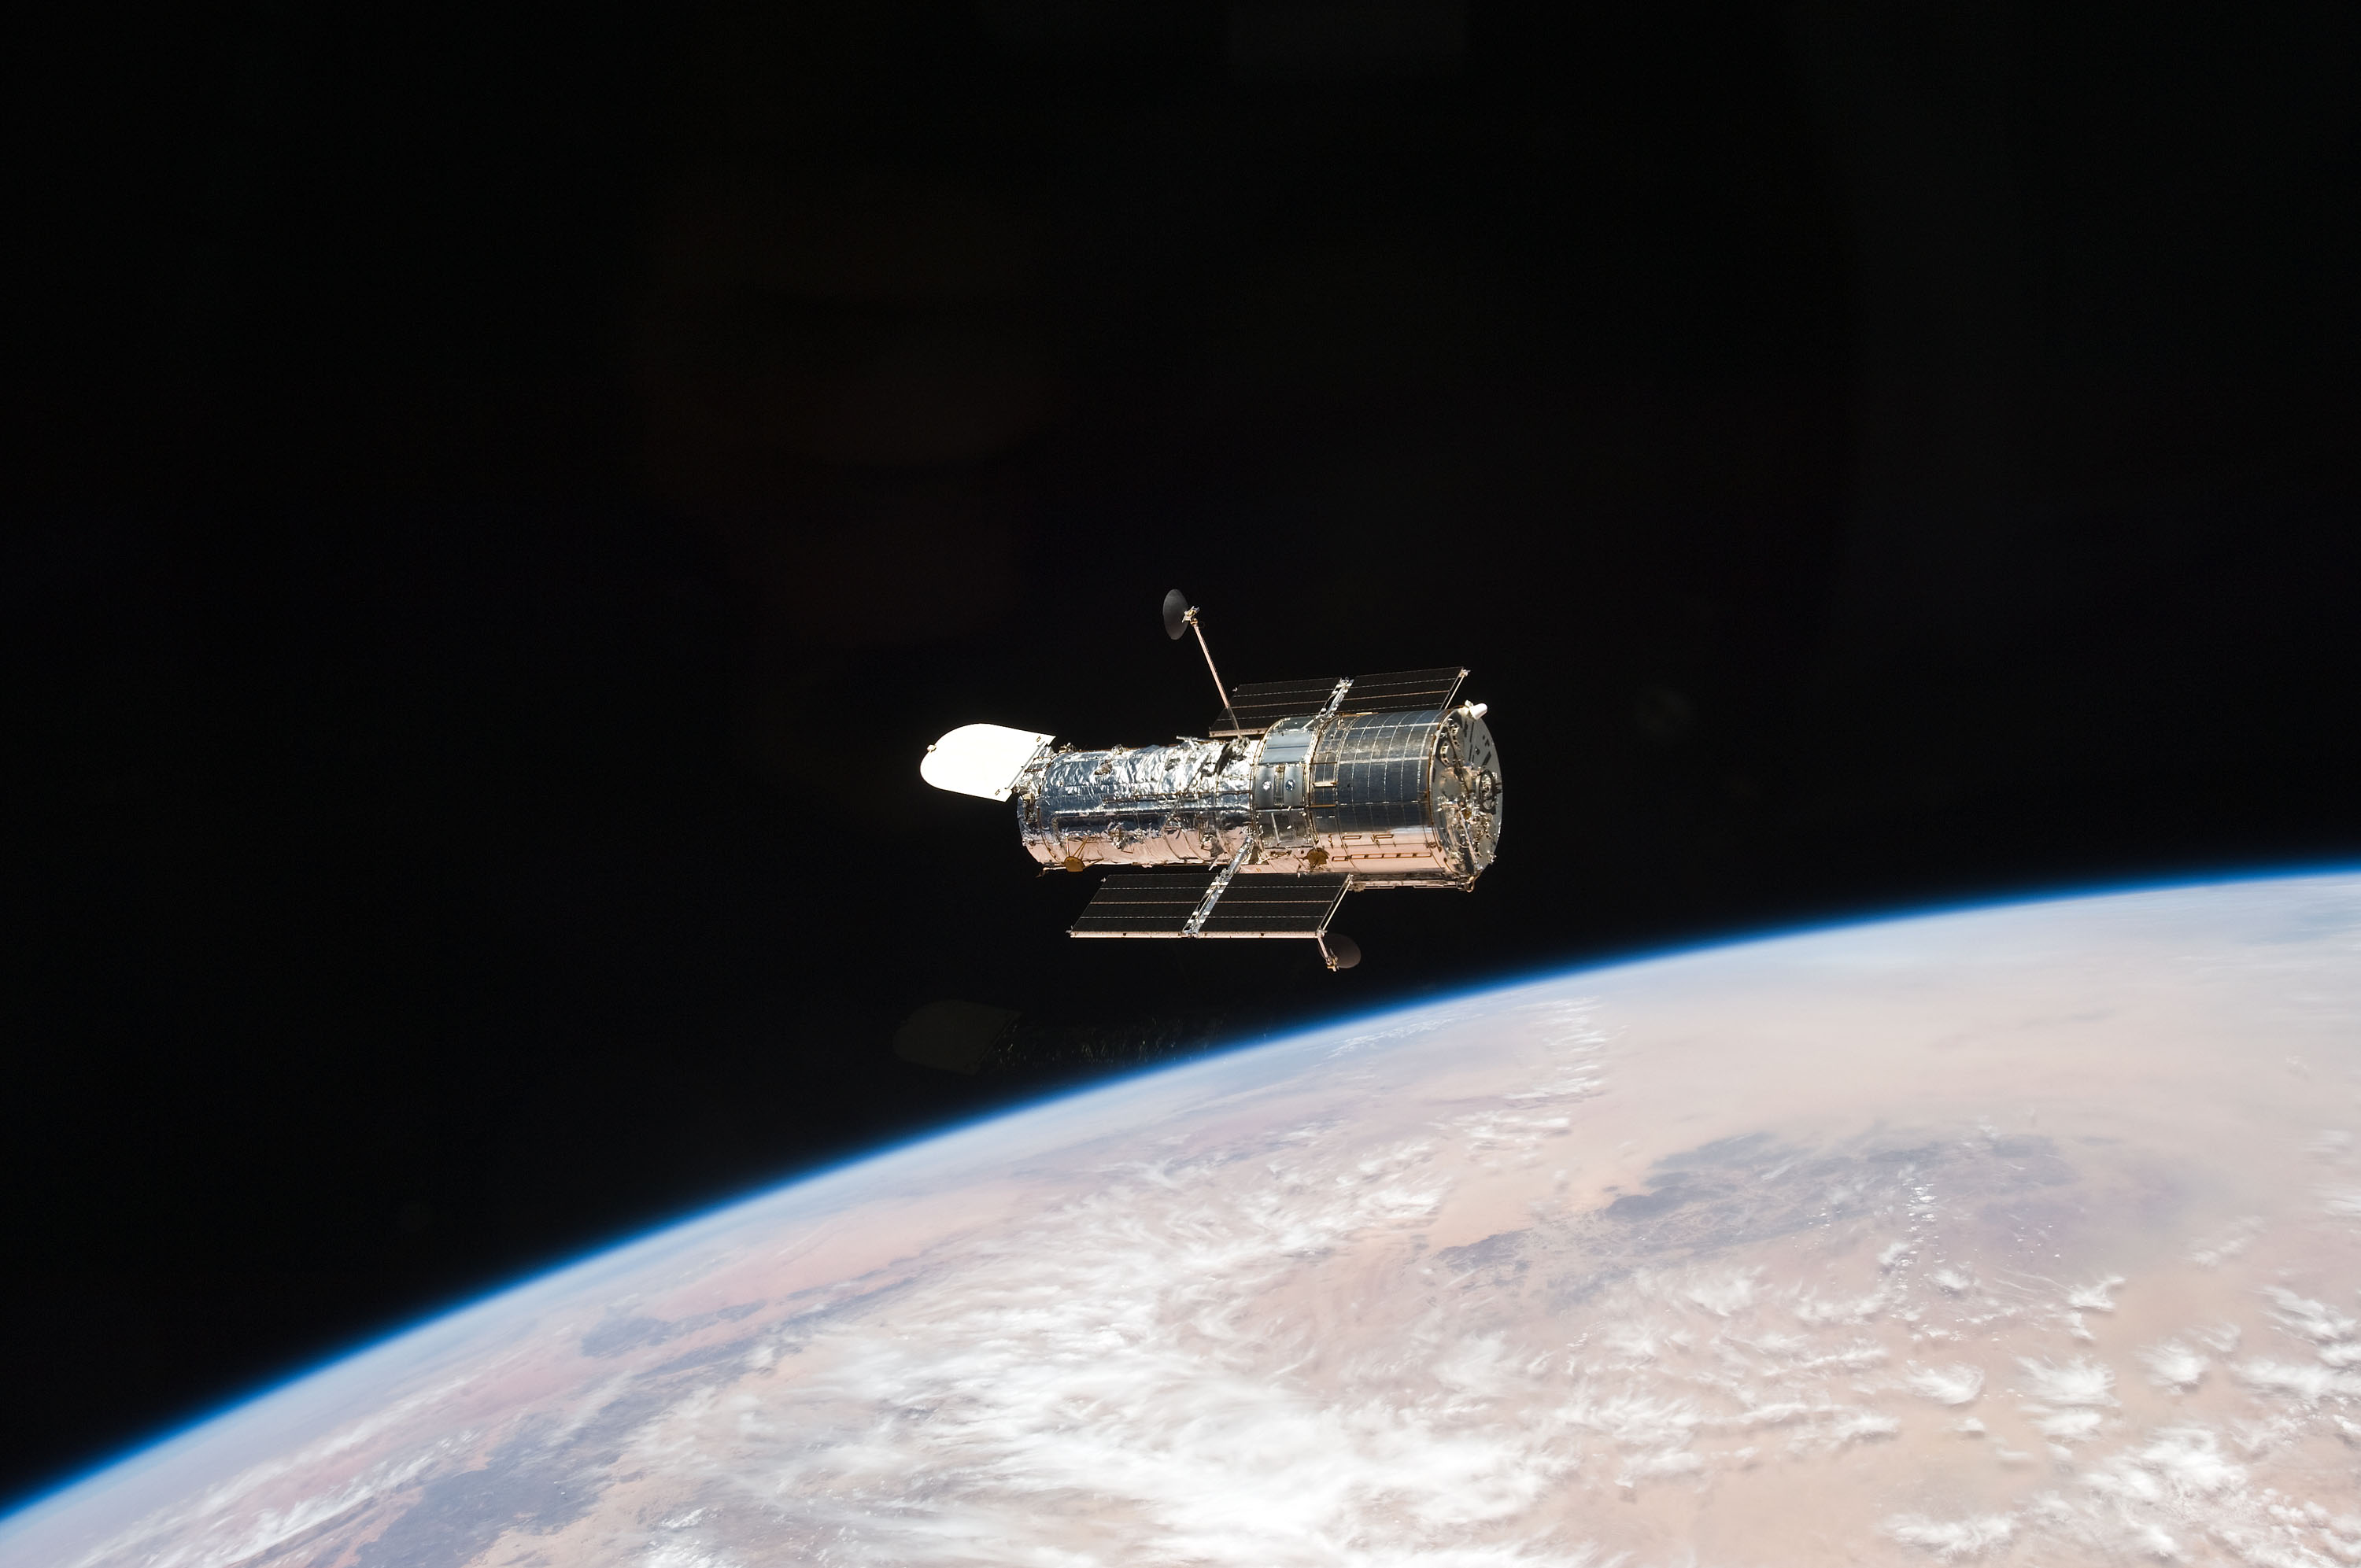 Hubble orbiting above Earth. Hubble is at the center of the image against a black background. Earth's limb covers the bottom, right third of the image.